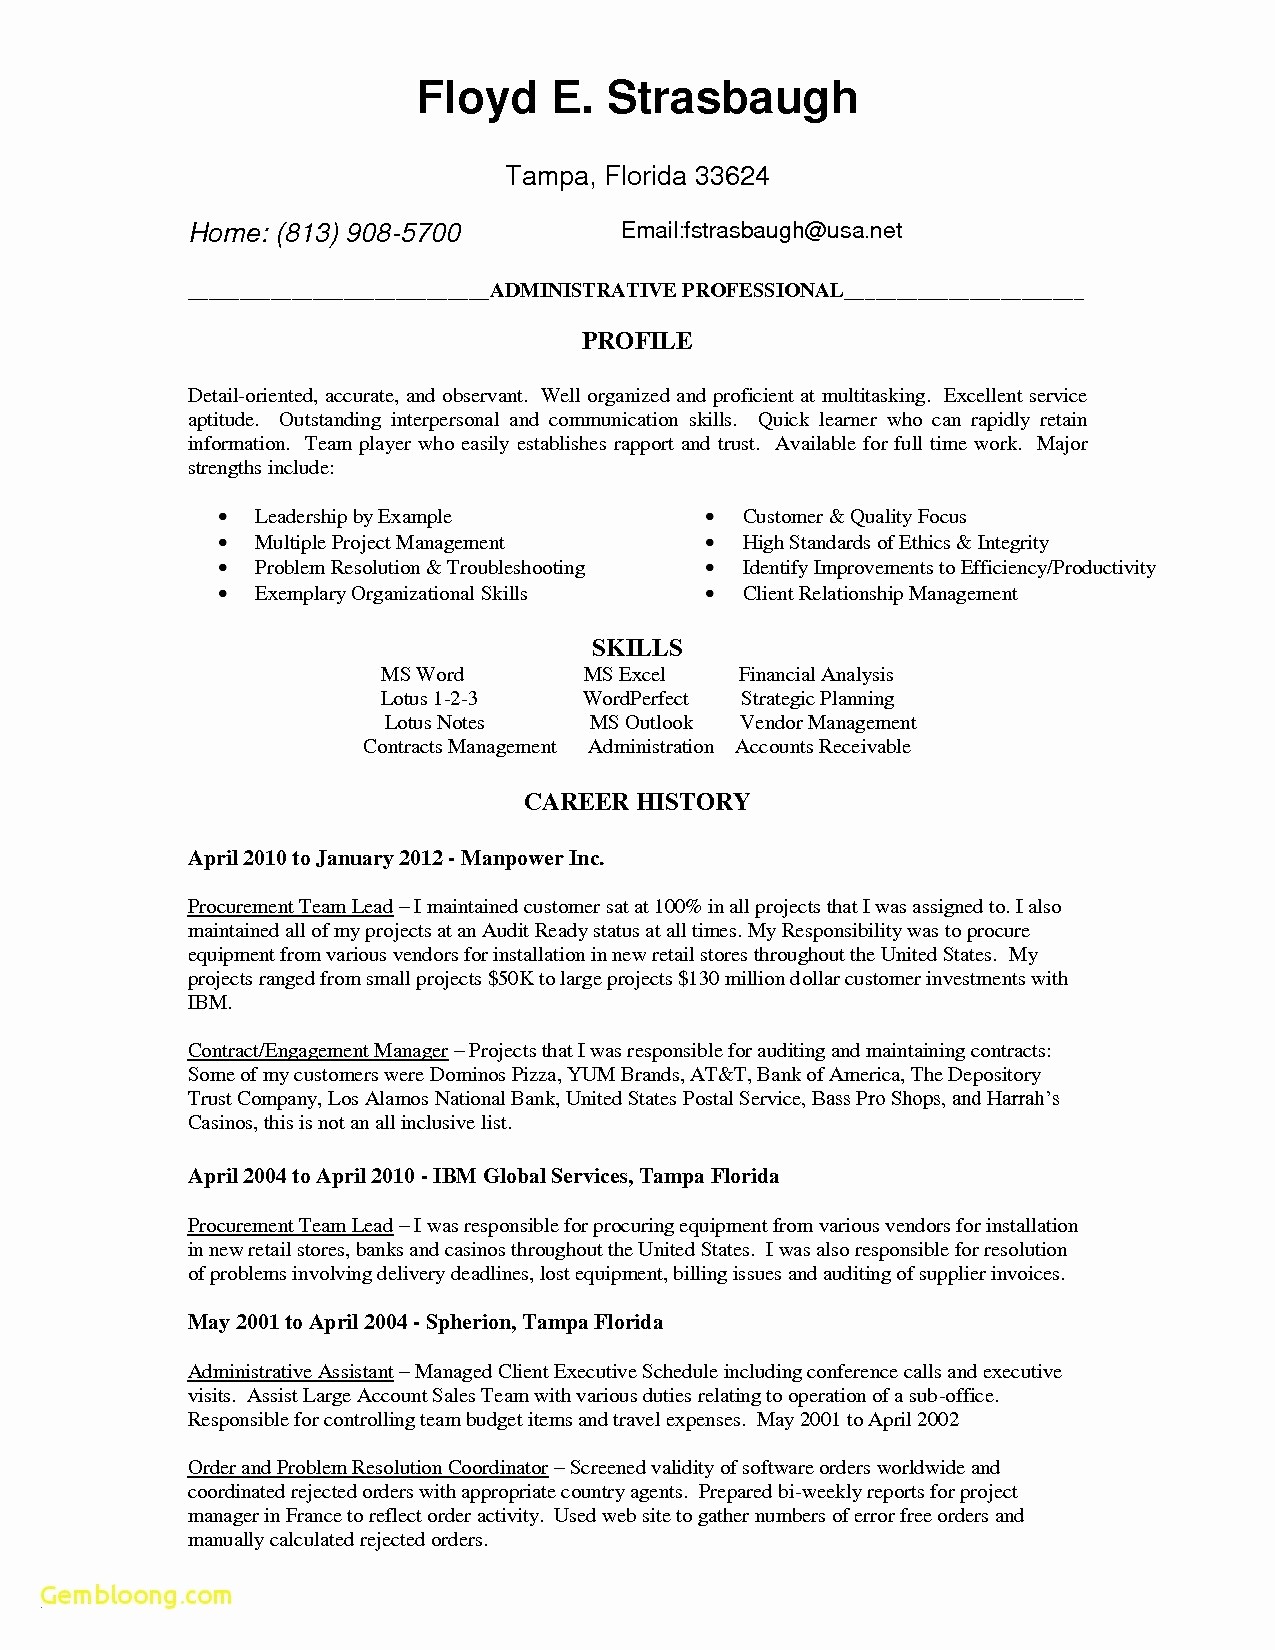 Resumes On Microsoft Word 2010 Awesome Reference Free Resume Templates Microsoft Word 2010